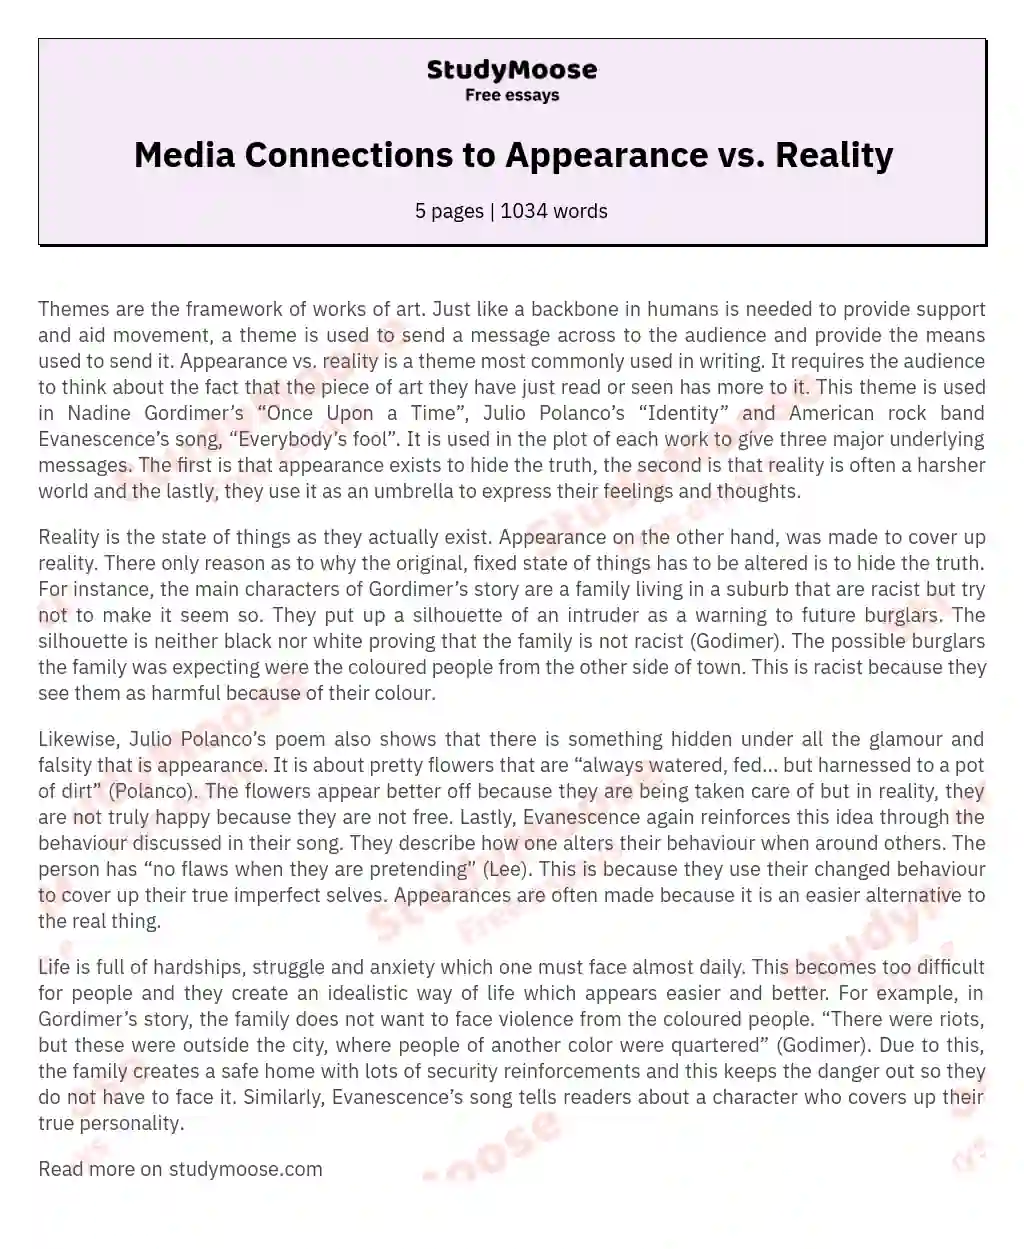 Media Connections to Appearance vs. Reality essay